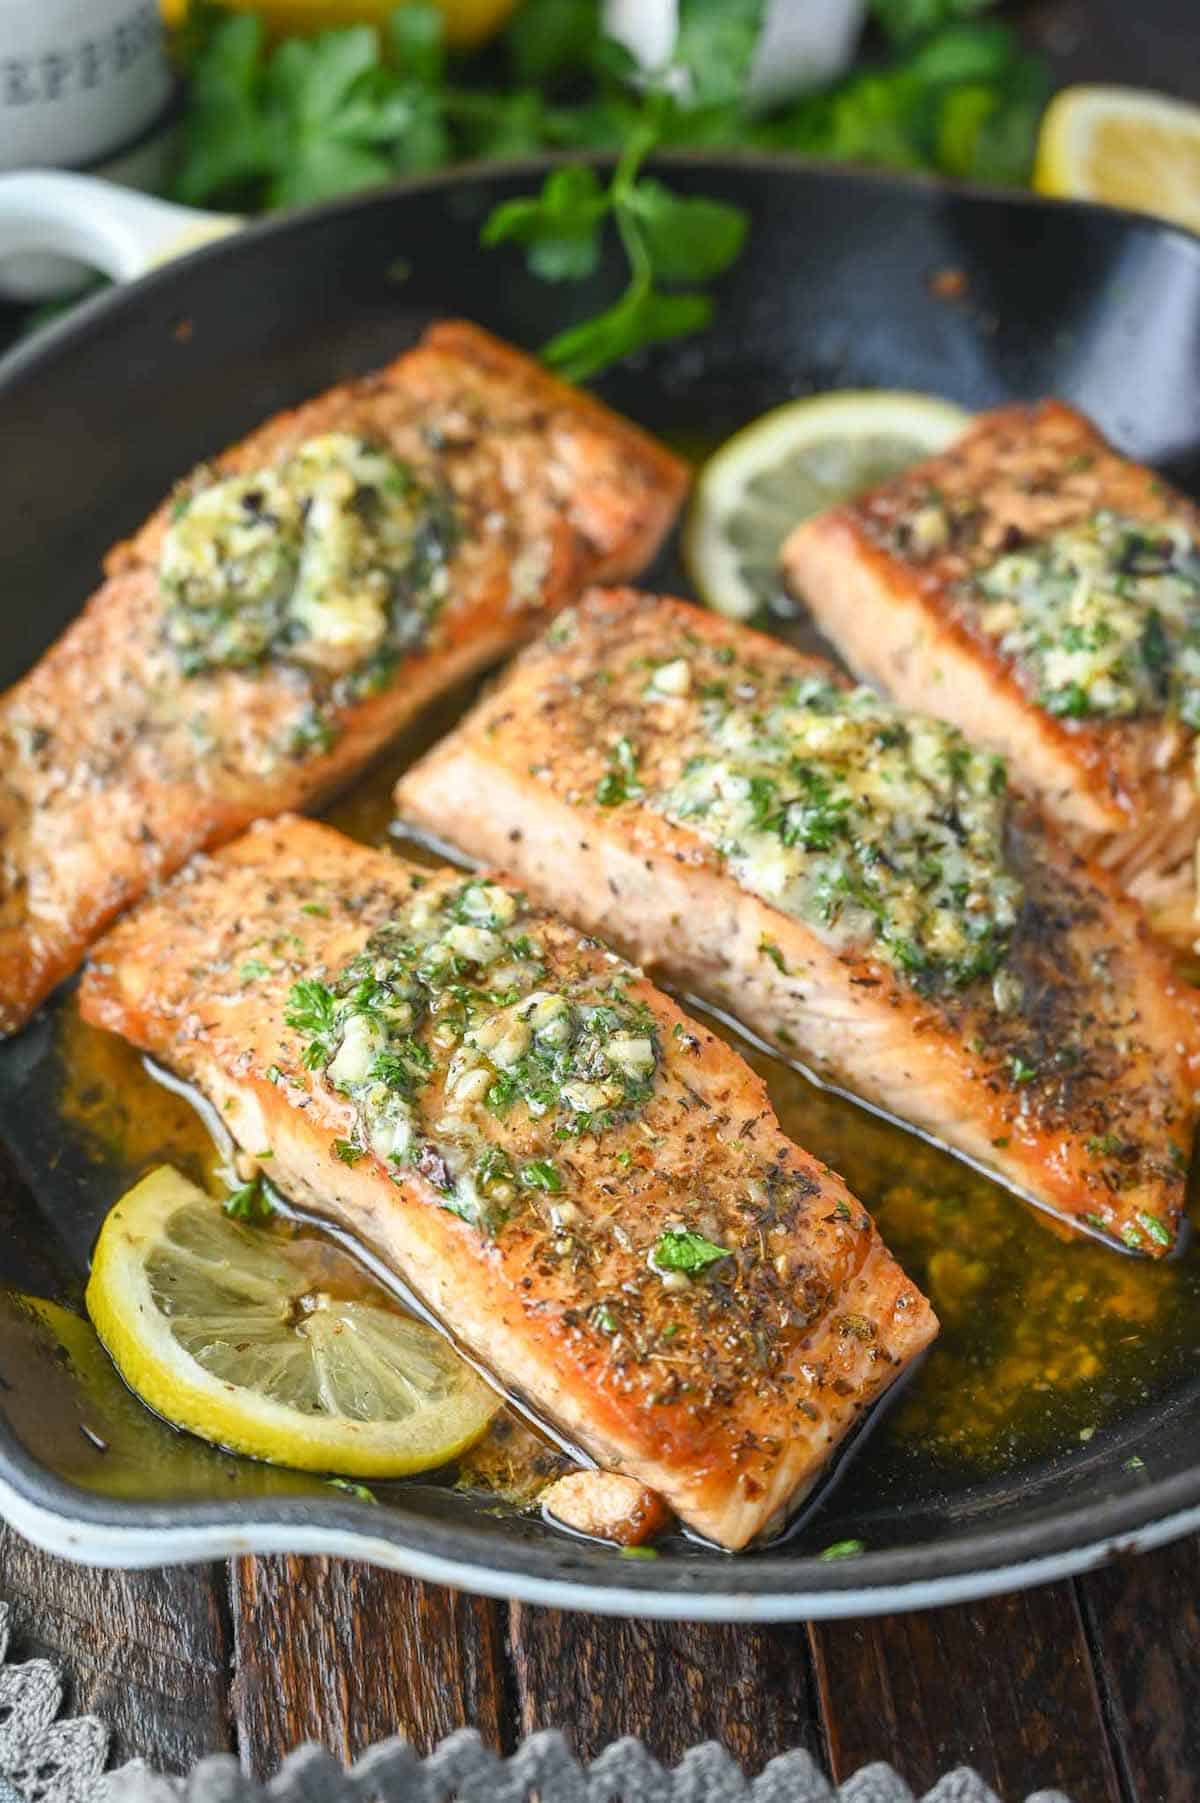 Salmon filets cooked in a skillet and lemon slices.